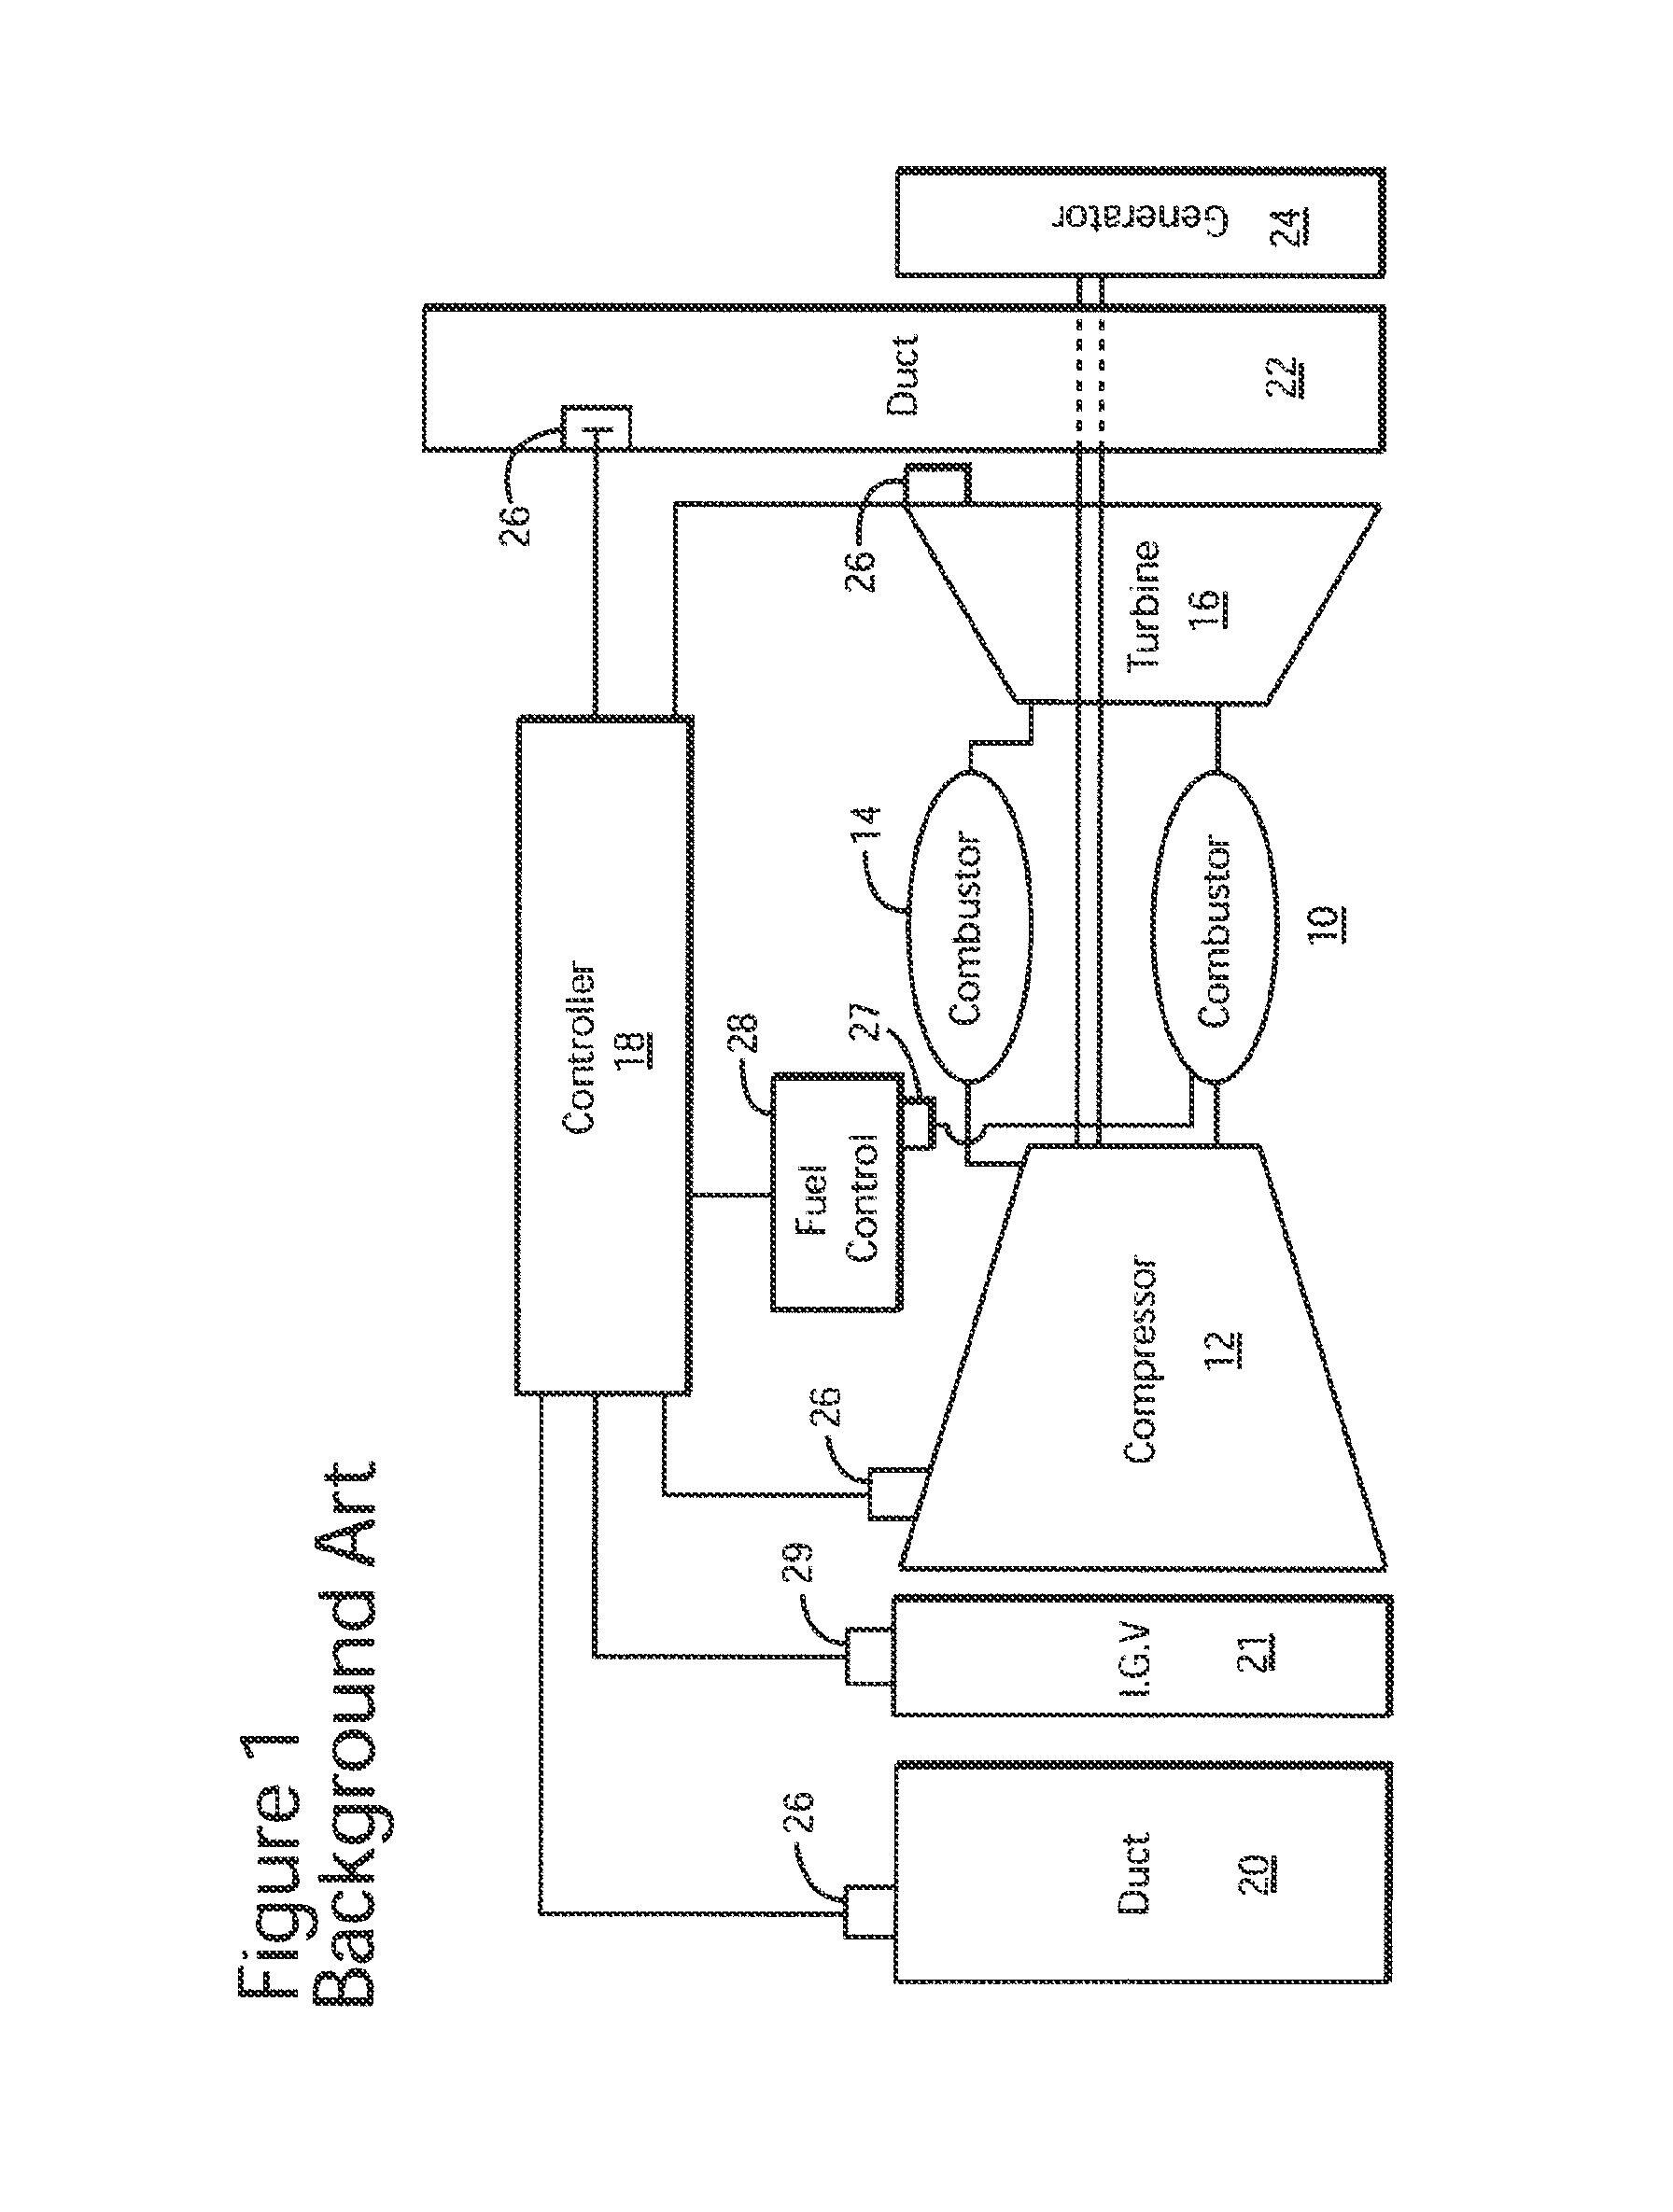 Exhaust temperature based threshold for control method and turbine